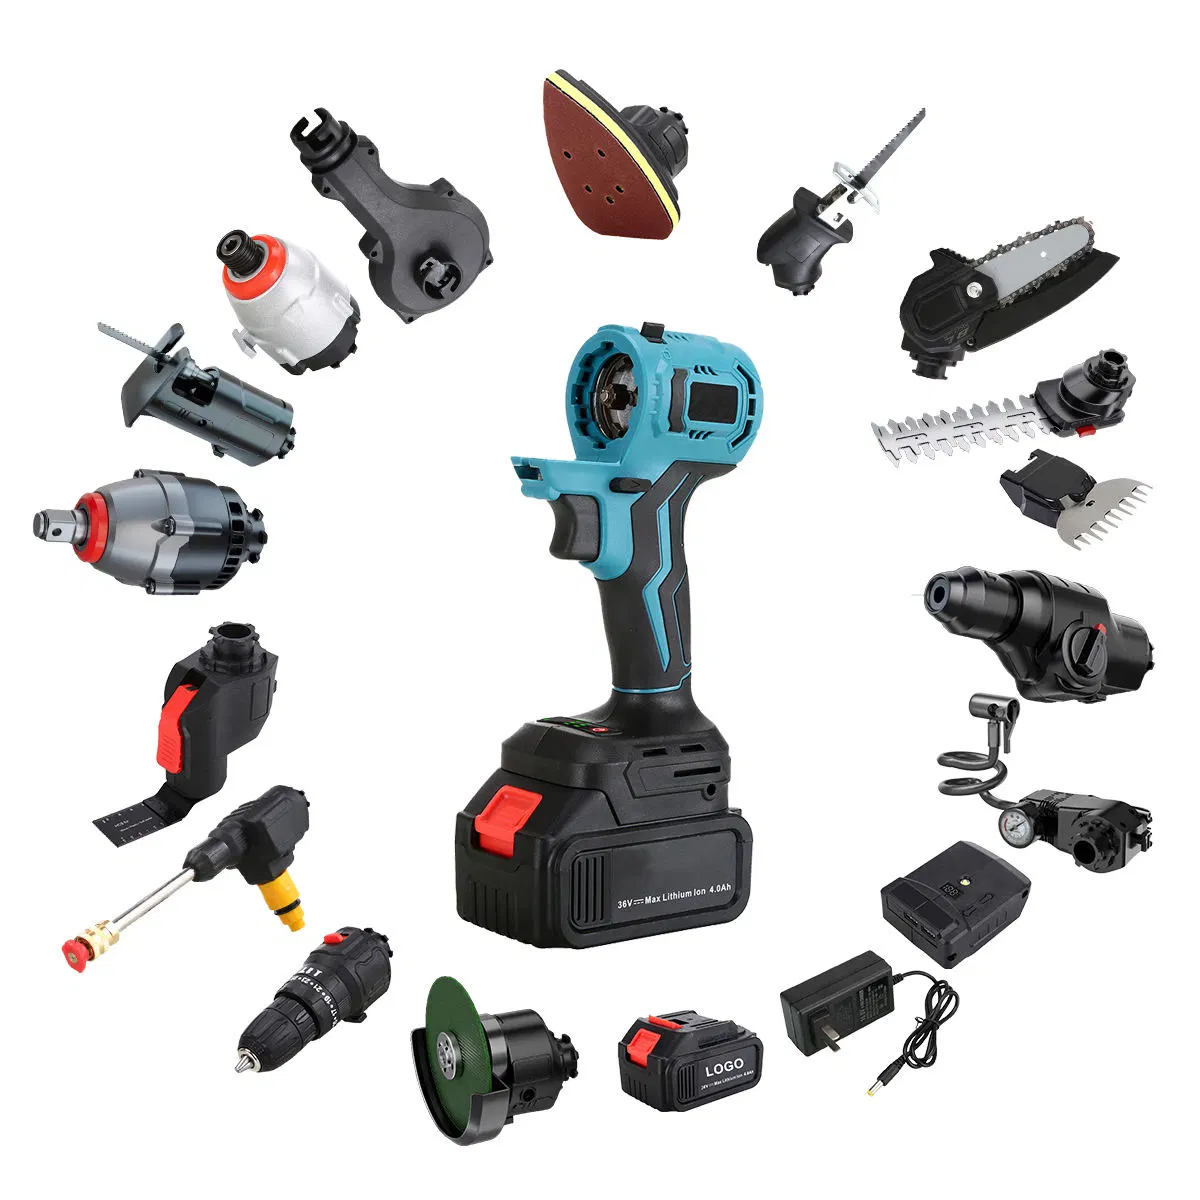 20V Drill Cordless Power Tool Kit Jig Saw Impact Wrench Angle Grinder Electric Hammer Tool Set Multi-Tool Set Cordless Drill Set